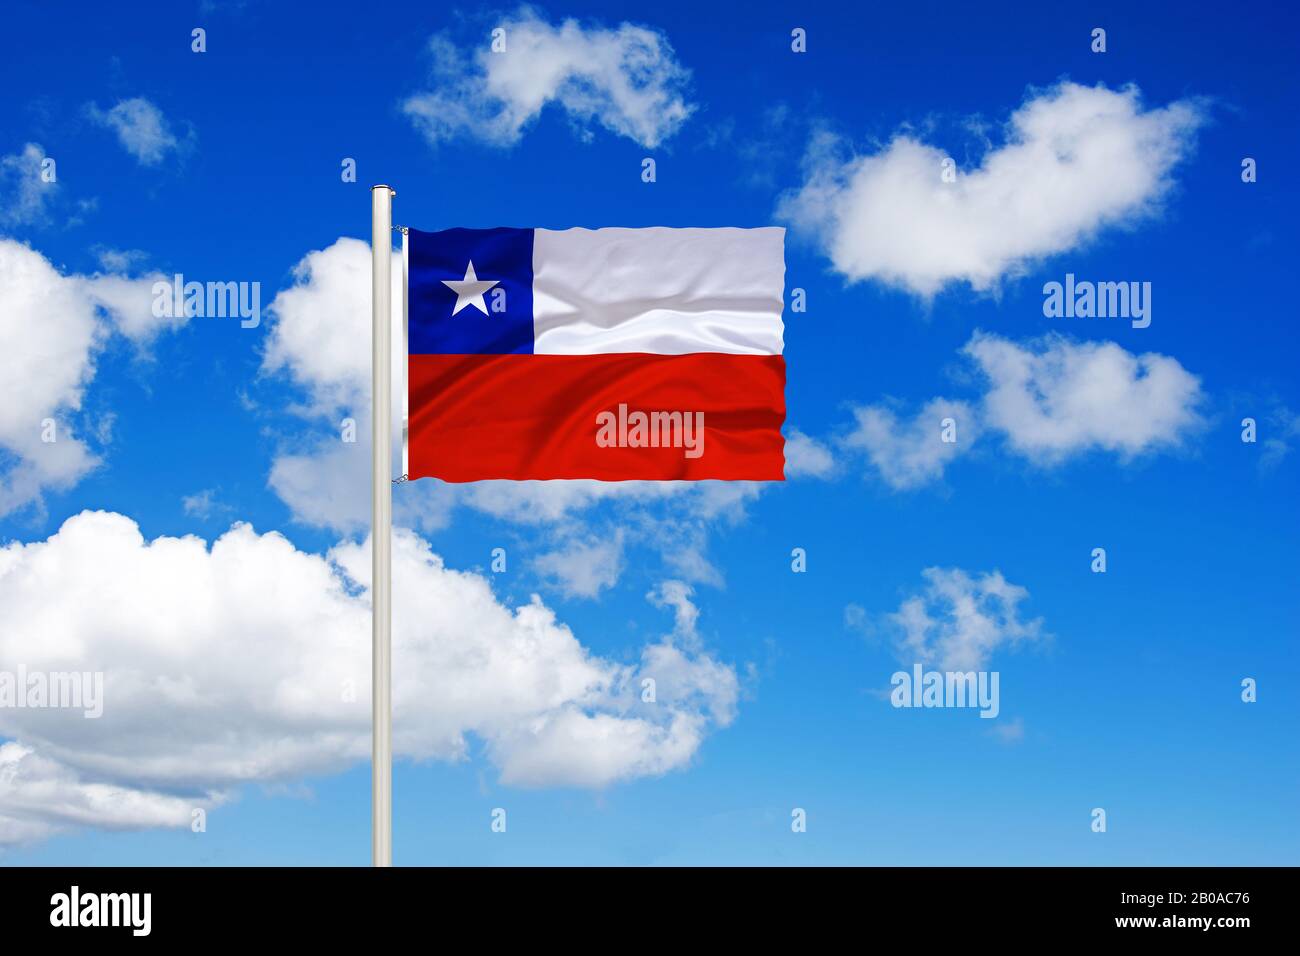 flag of Chile in front of blue cloudy sky, Chile Stock Photo